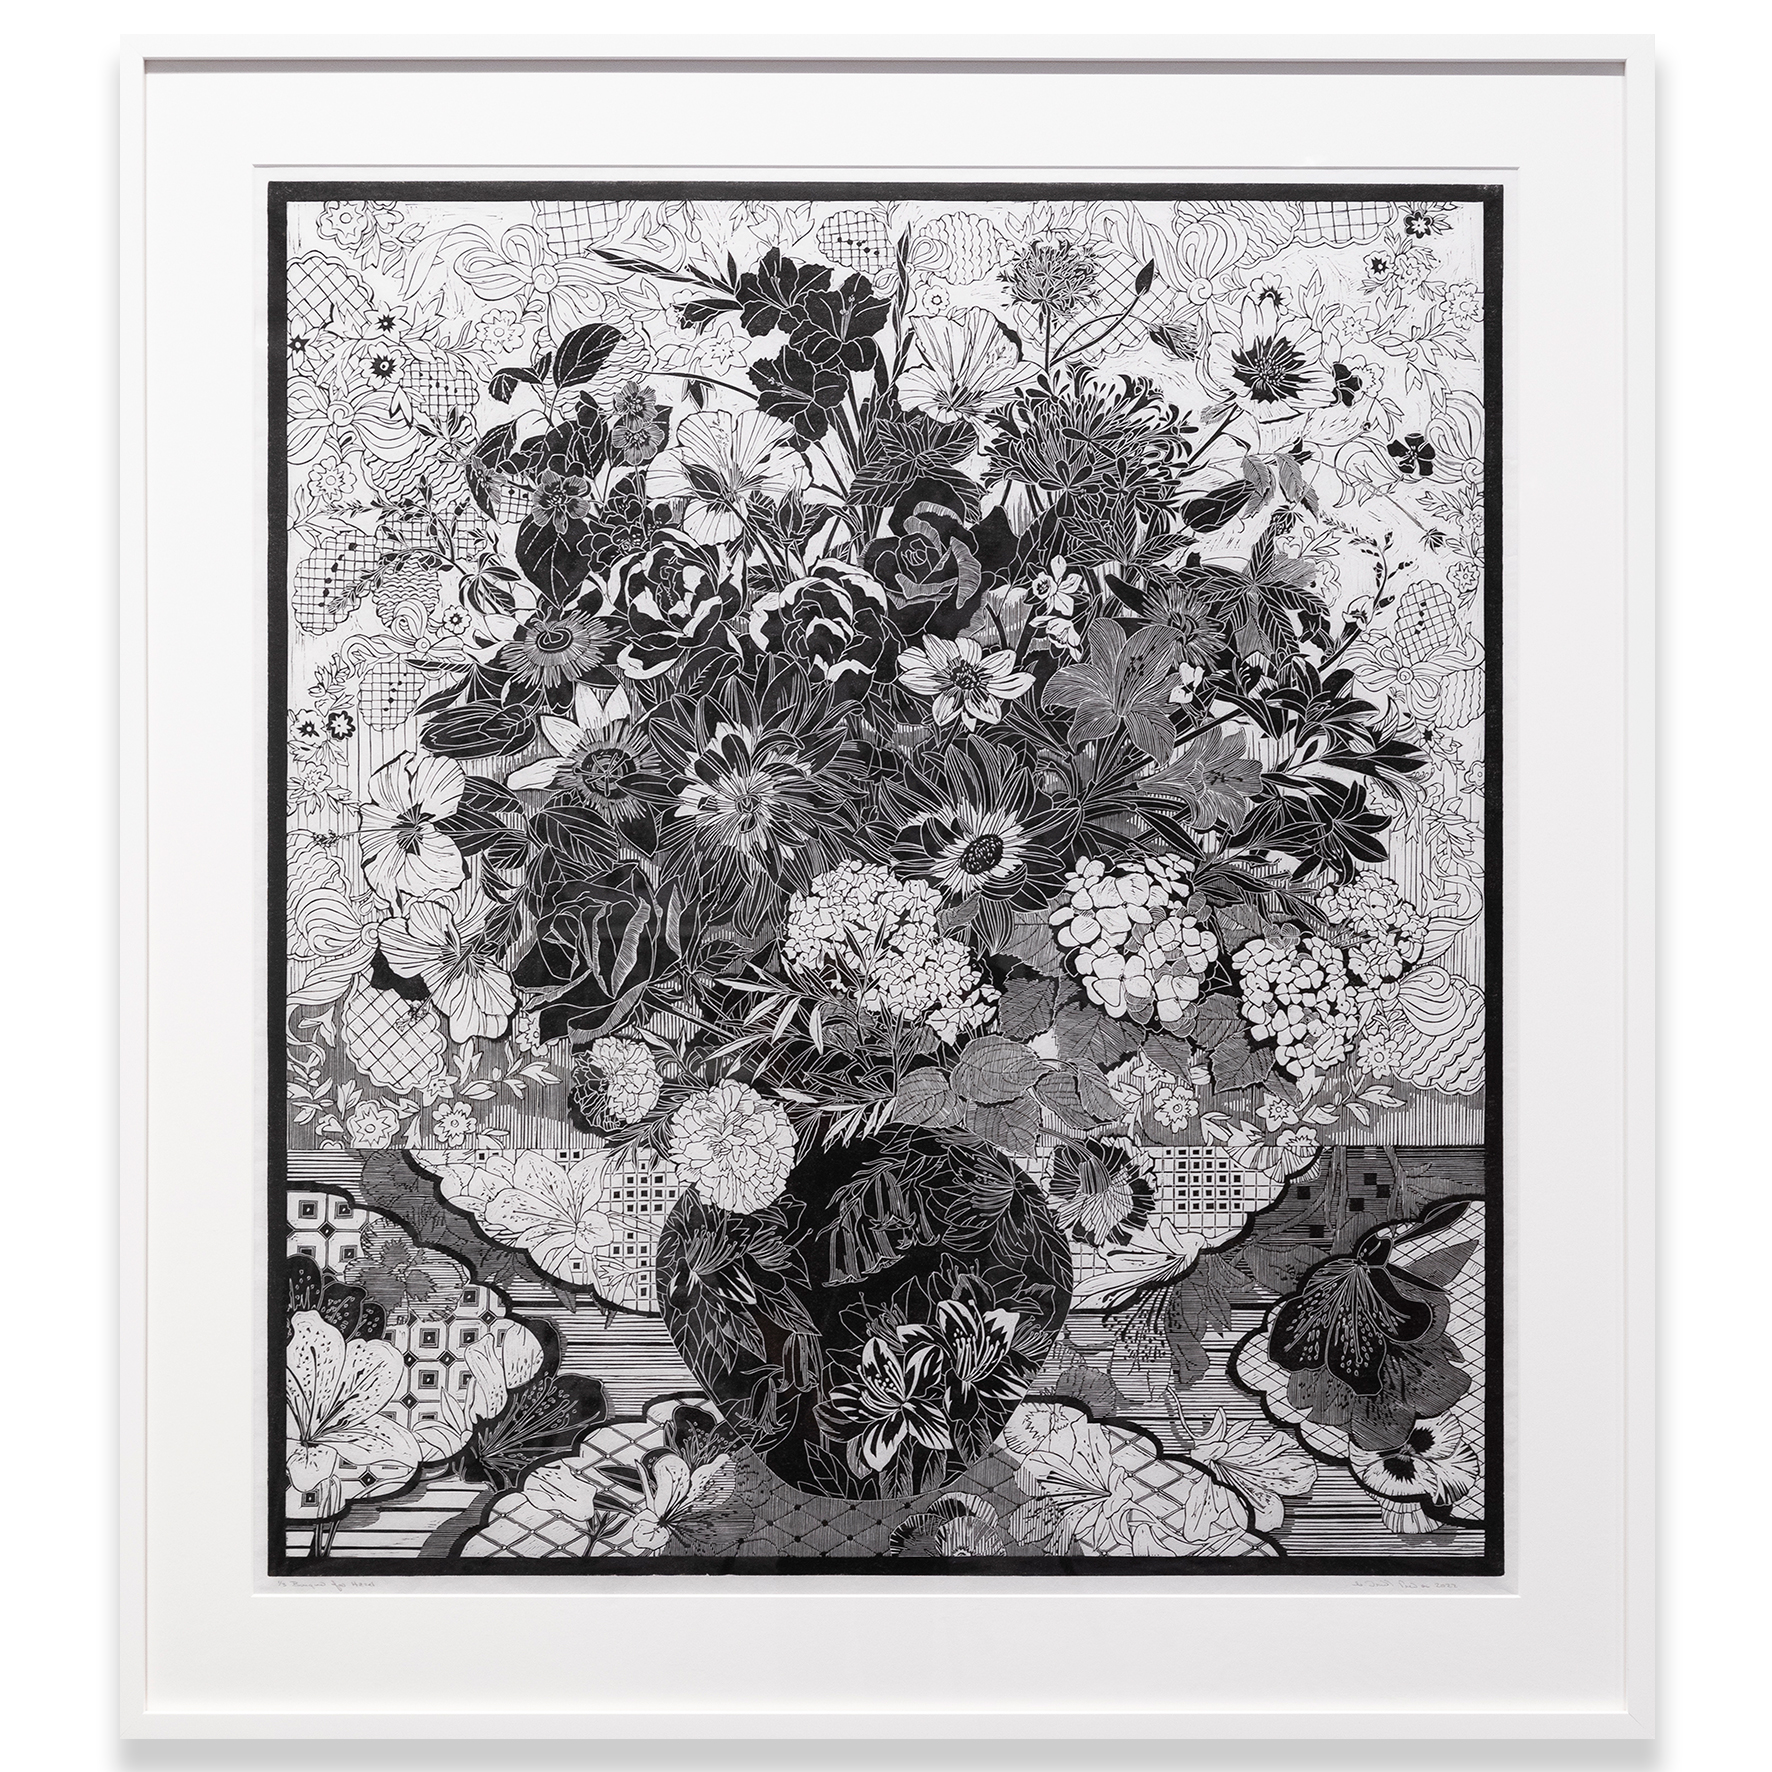 Christine Druitt Preston: Bouquet for Hazel 2/3, 2022. (Framed) Hand rubbed Lino block print edition on Wenzhou paper, printed by Artist with a limited edition of 3. Approximate framed Size: 120x107x7cm (Perspex). Available Artsite Contemporary Australia.